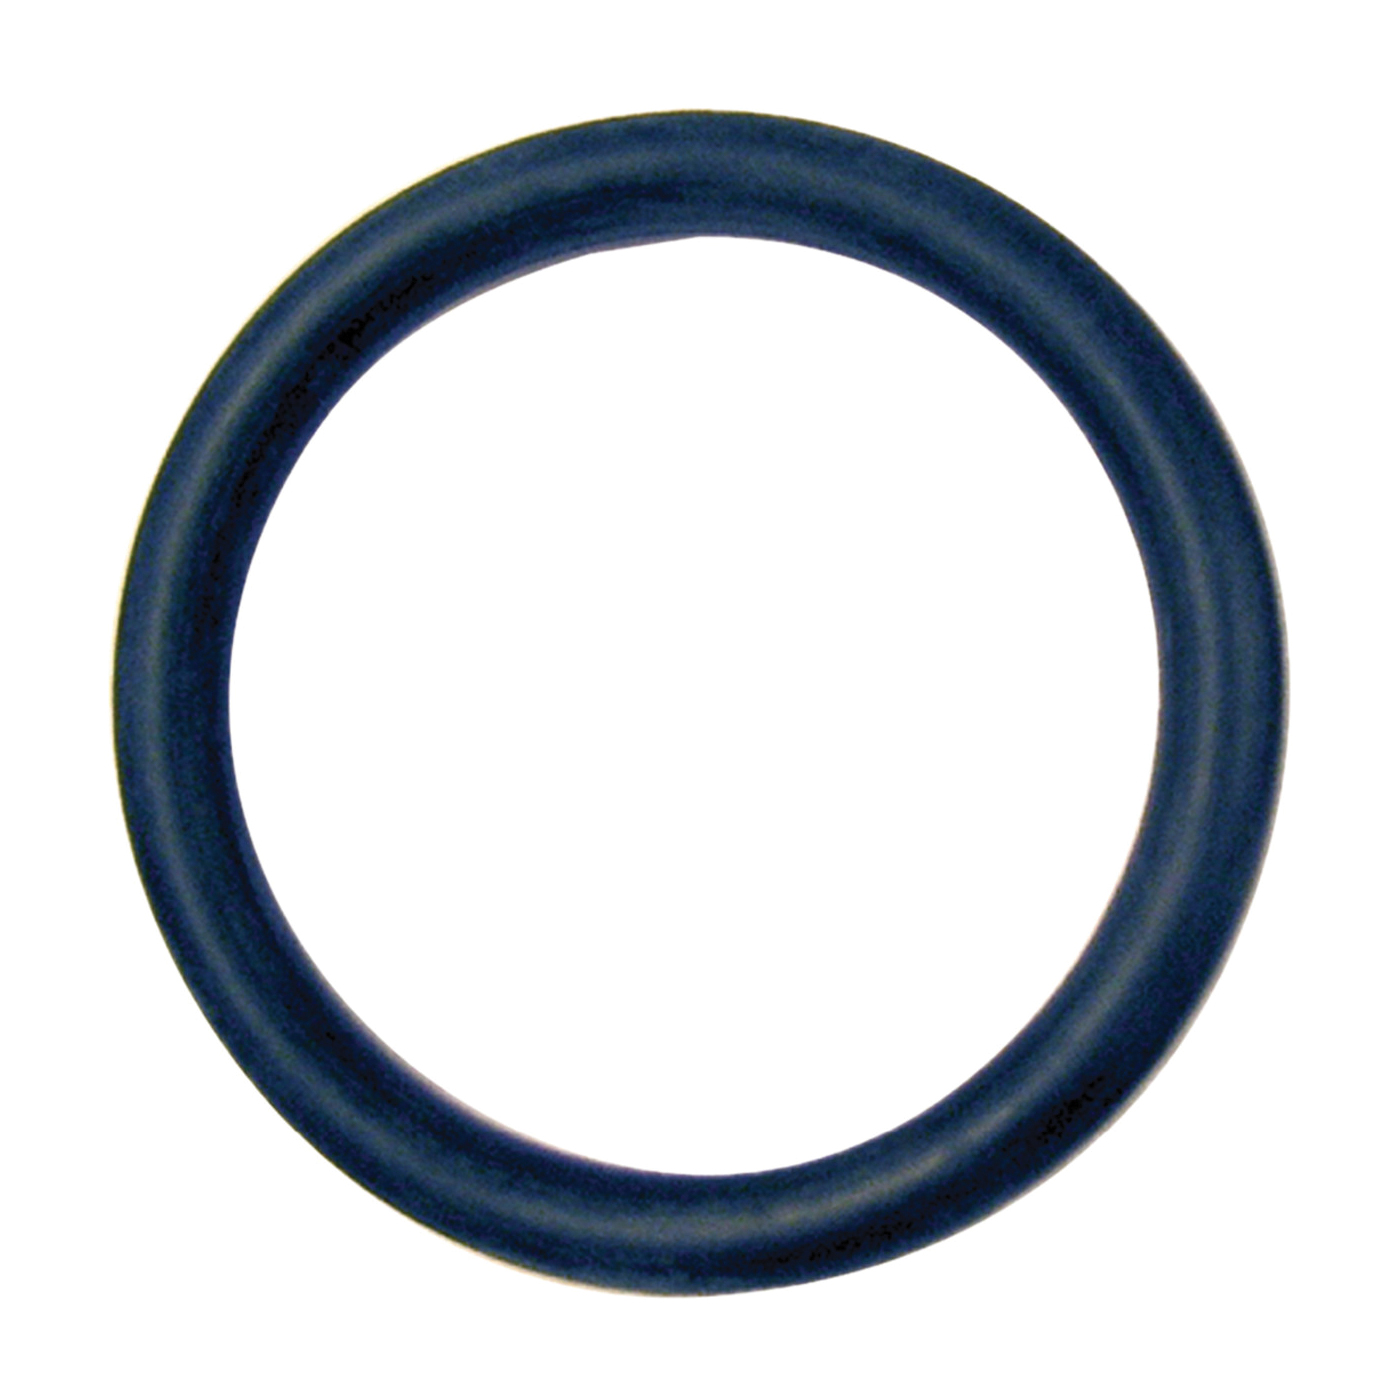 780044 Faucet O-Ring, 1/16 in ID x 5/16 in OD Dia, 1/16 in Thick